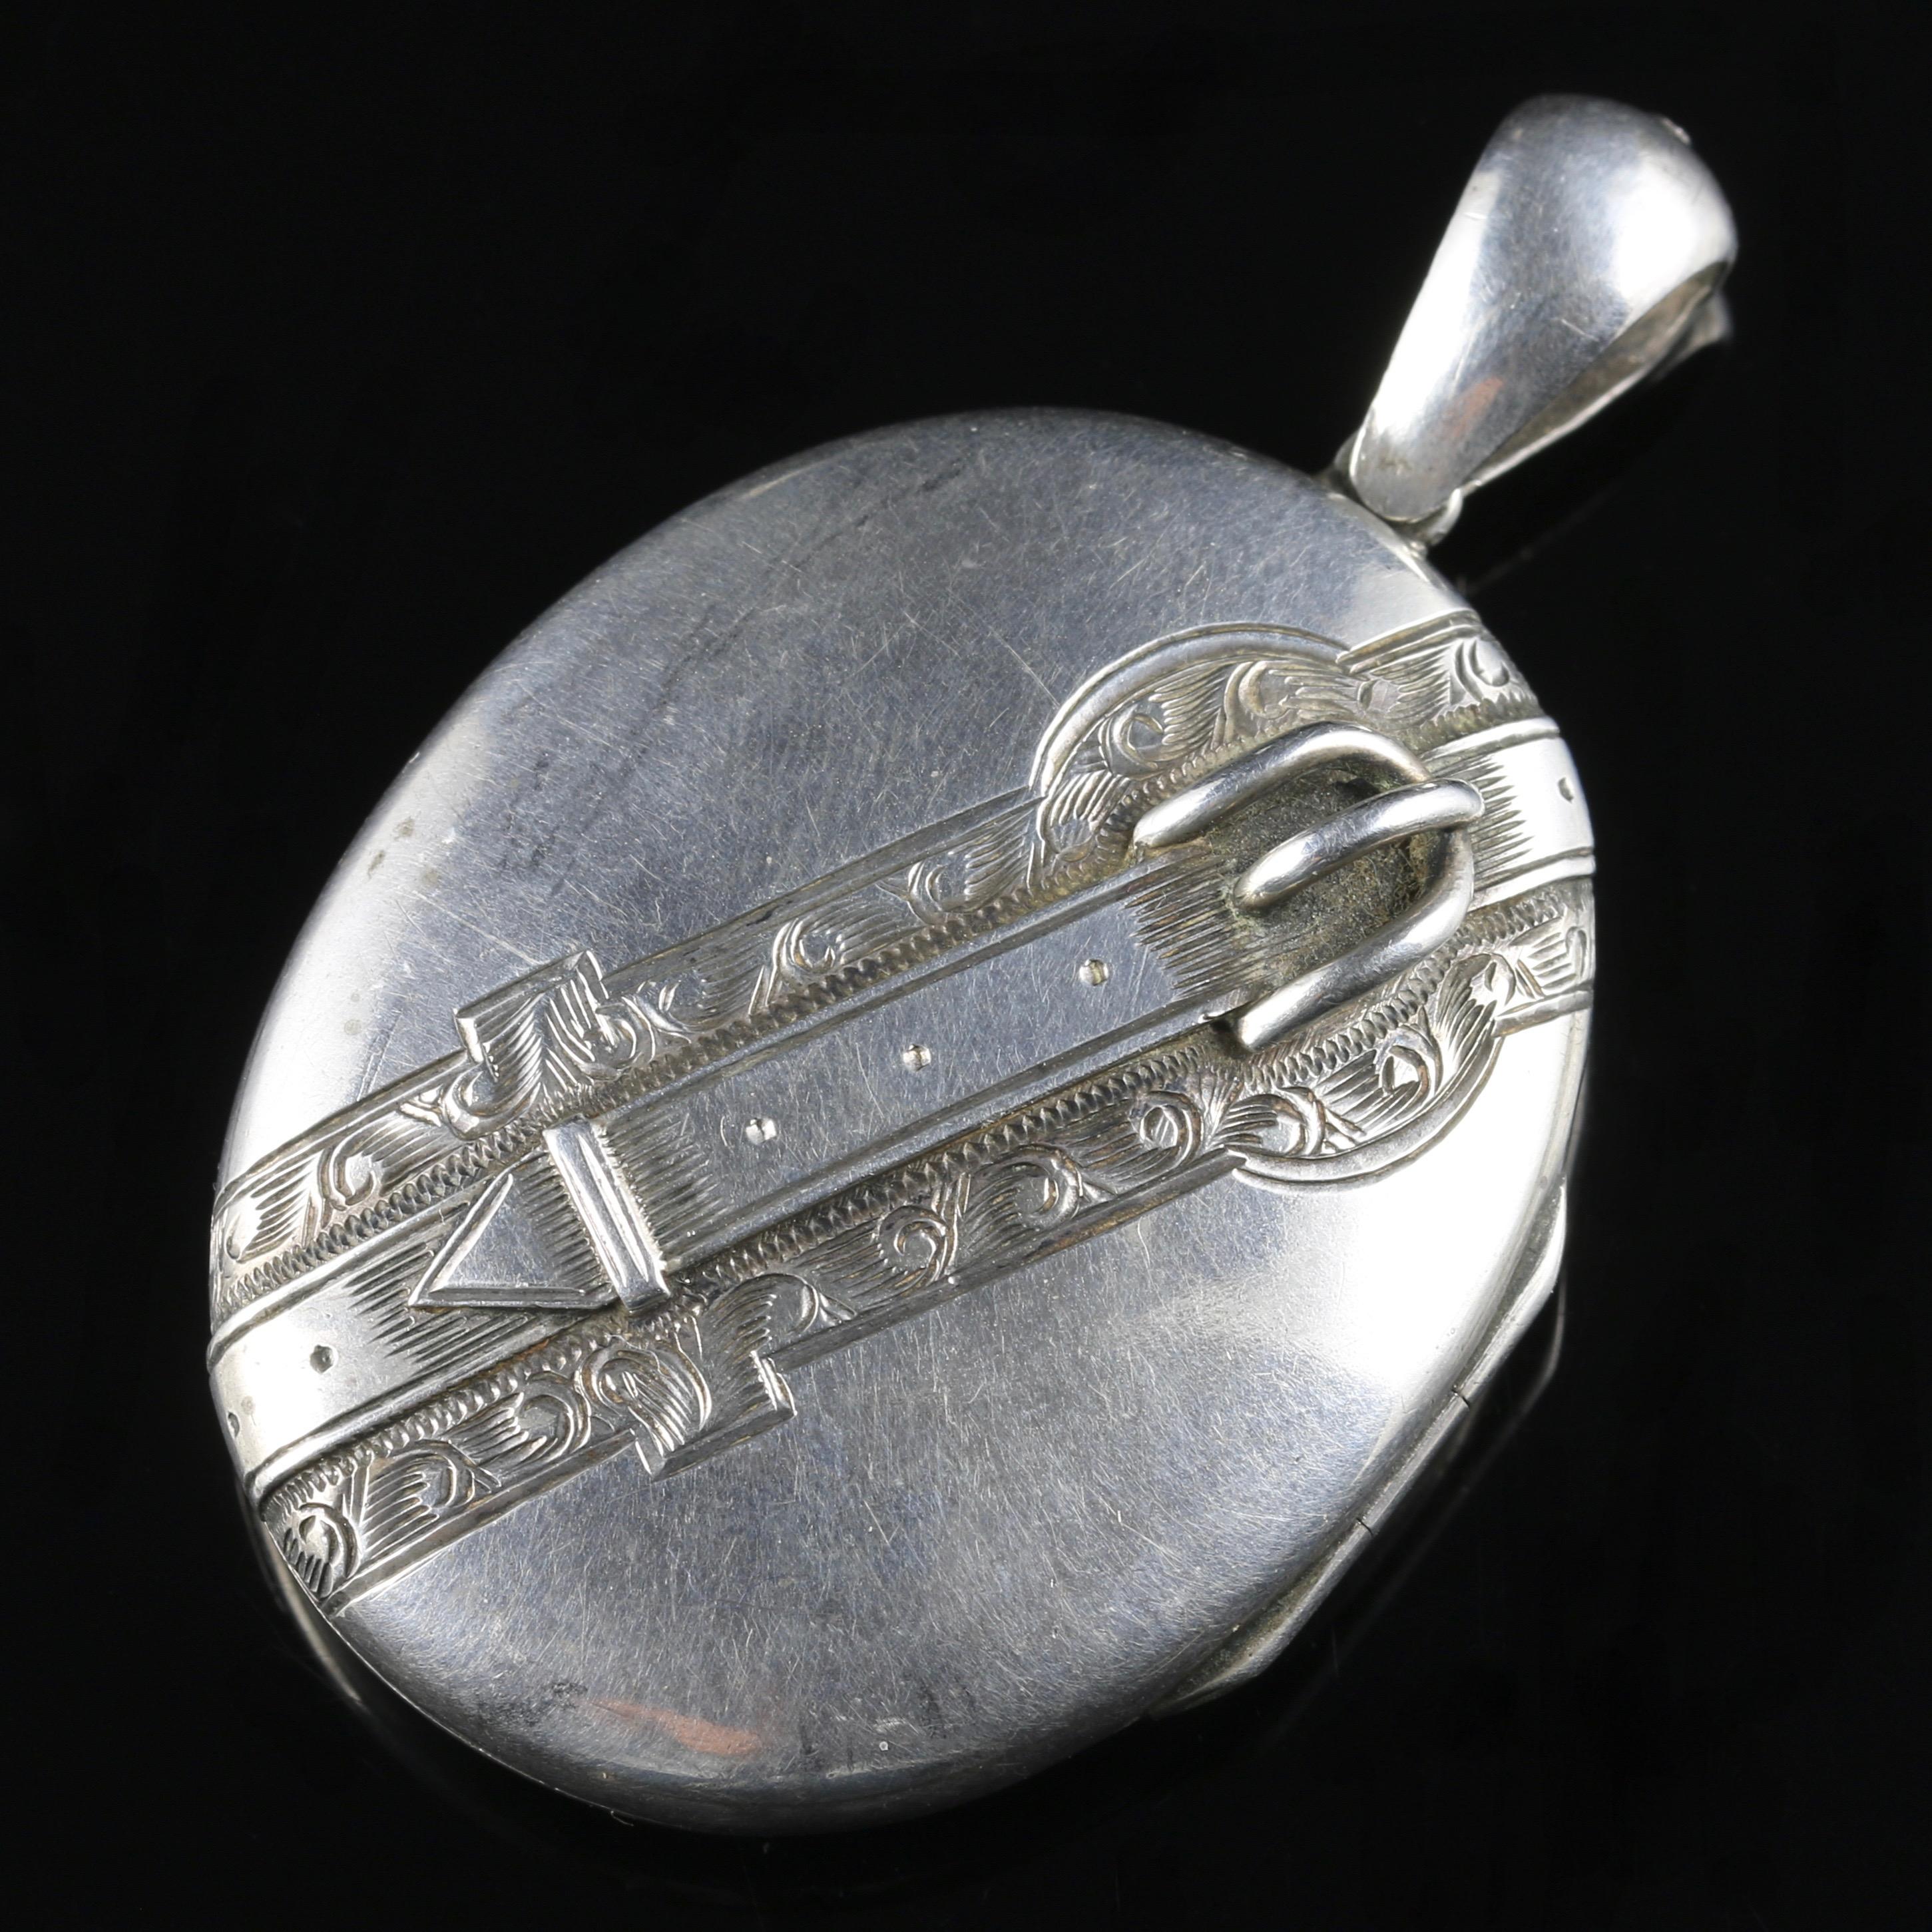 For more details please click continue reading down below...

This fabulous antique Victorian locket is all Sterling Silver, Circa 1870.

A lovely engraved large locket that depicts a buckle diagonally strapped across the front with beautiful